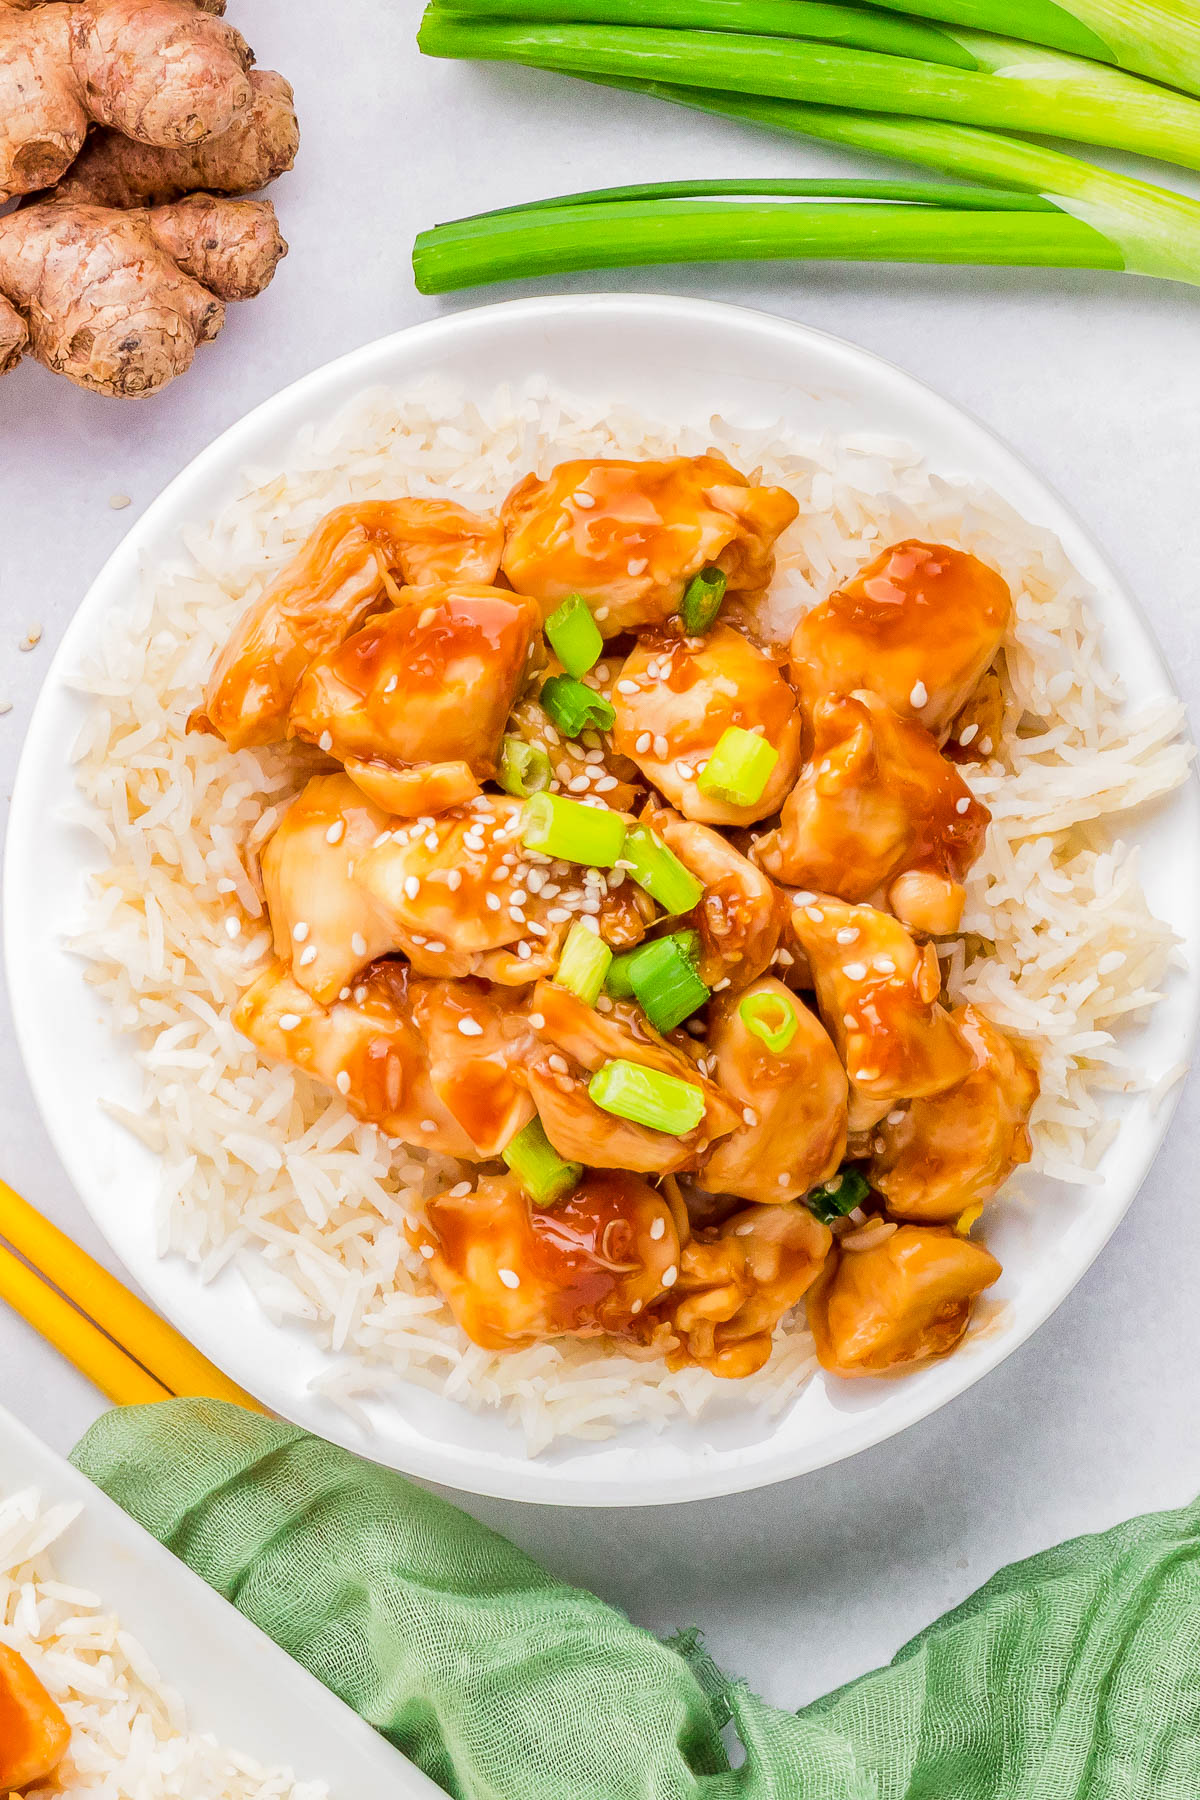 A bowl of white rice topped with pieces of orange-glazed chicken, garnished with sesame seeds and chopped green onions, with ginger root and green onions in the background.